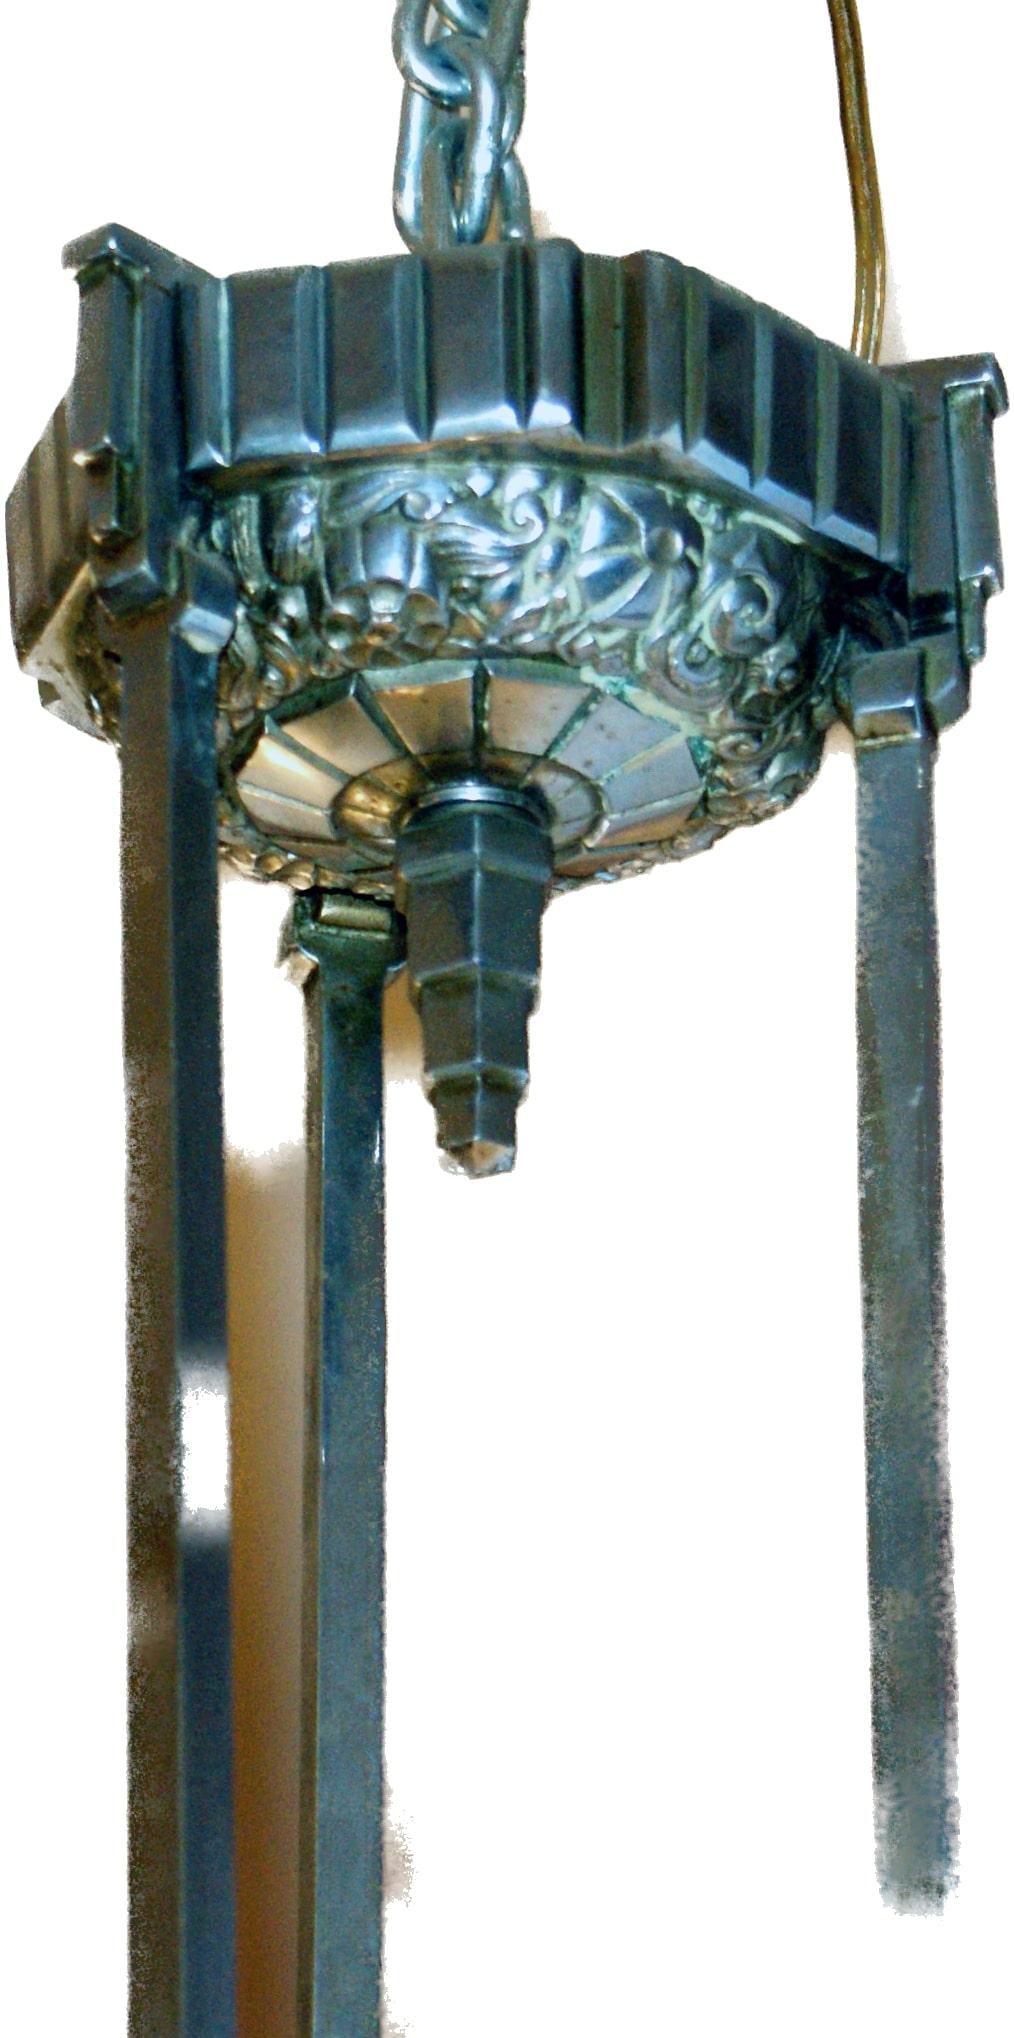 Straight from the Art Deco period of the mid 20th century, it consists of a white chromed bronze structure holding three tulip lampshades. The lampshades and the one piece middle basin are made of glass that was molded and pressed, a technique